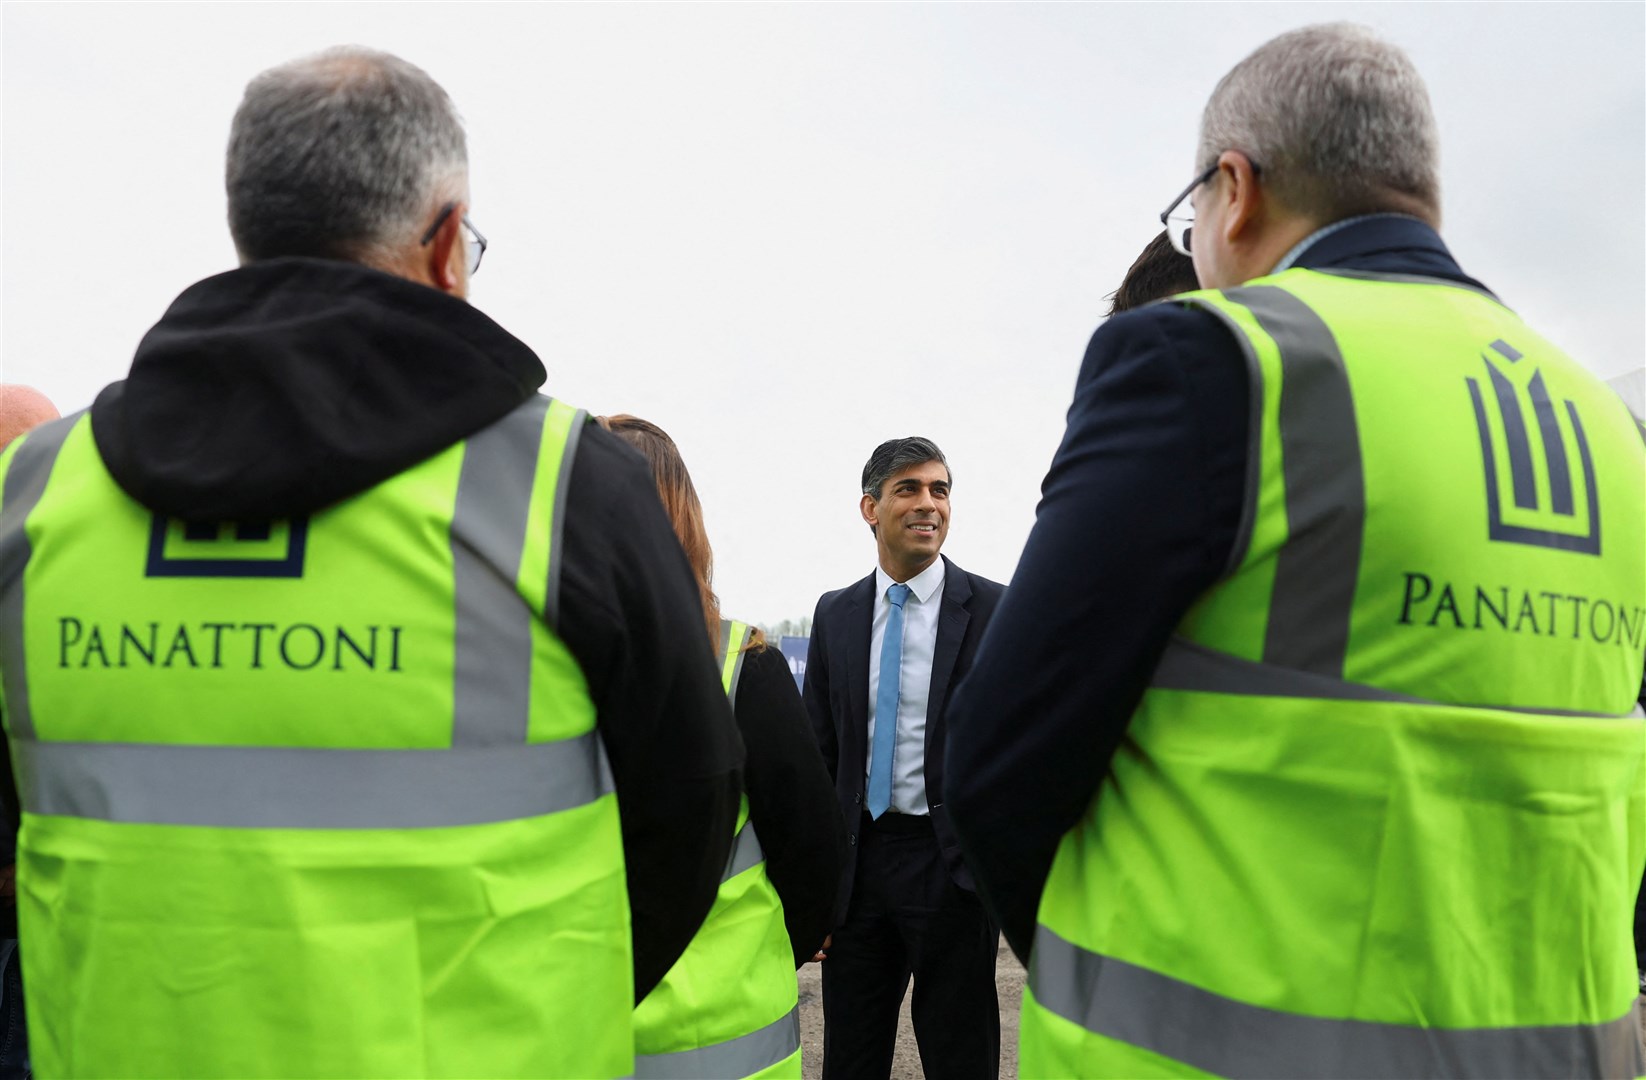 Mr Sunak spoke to Panattoni staff working on the demolition and reconstruction of the site (Toby Melville/PA)